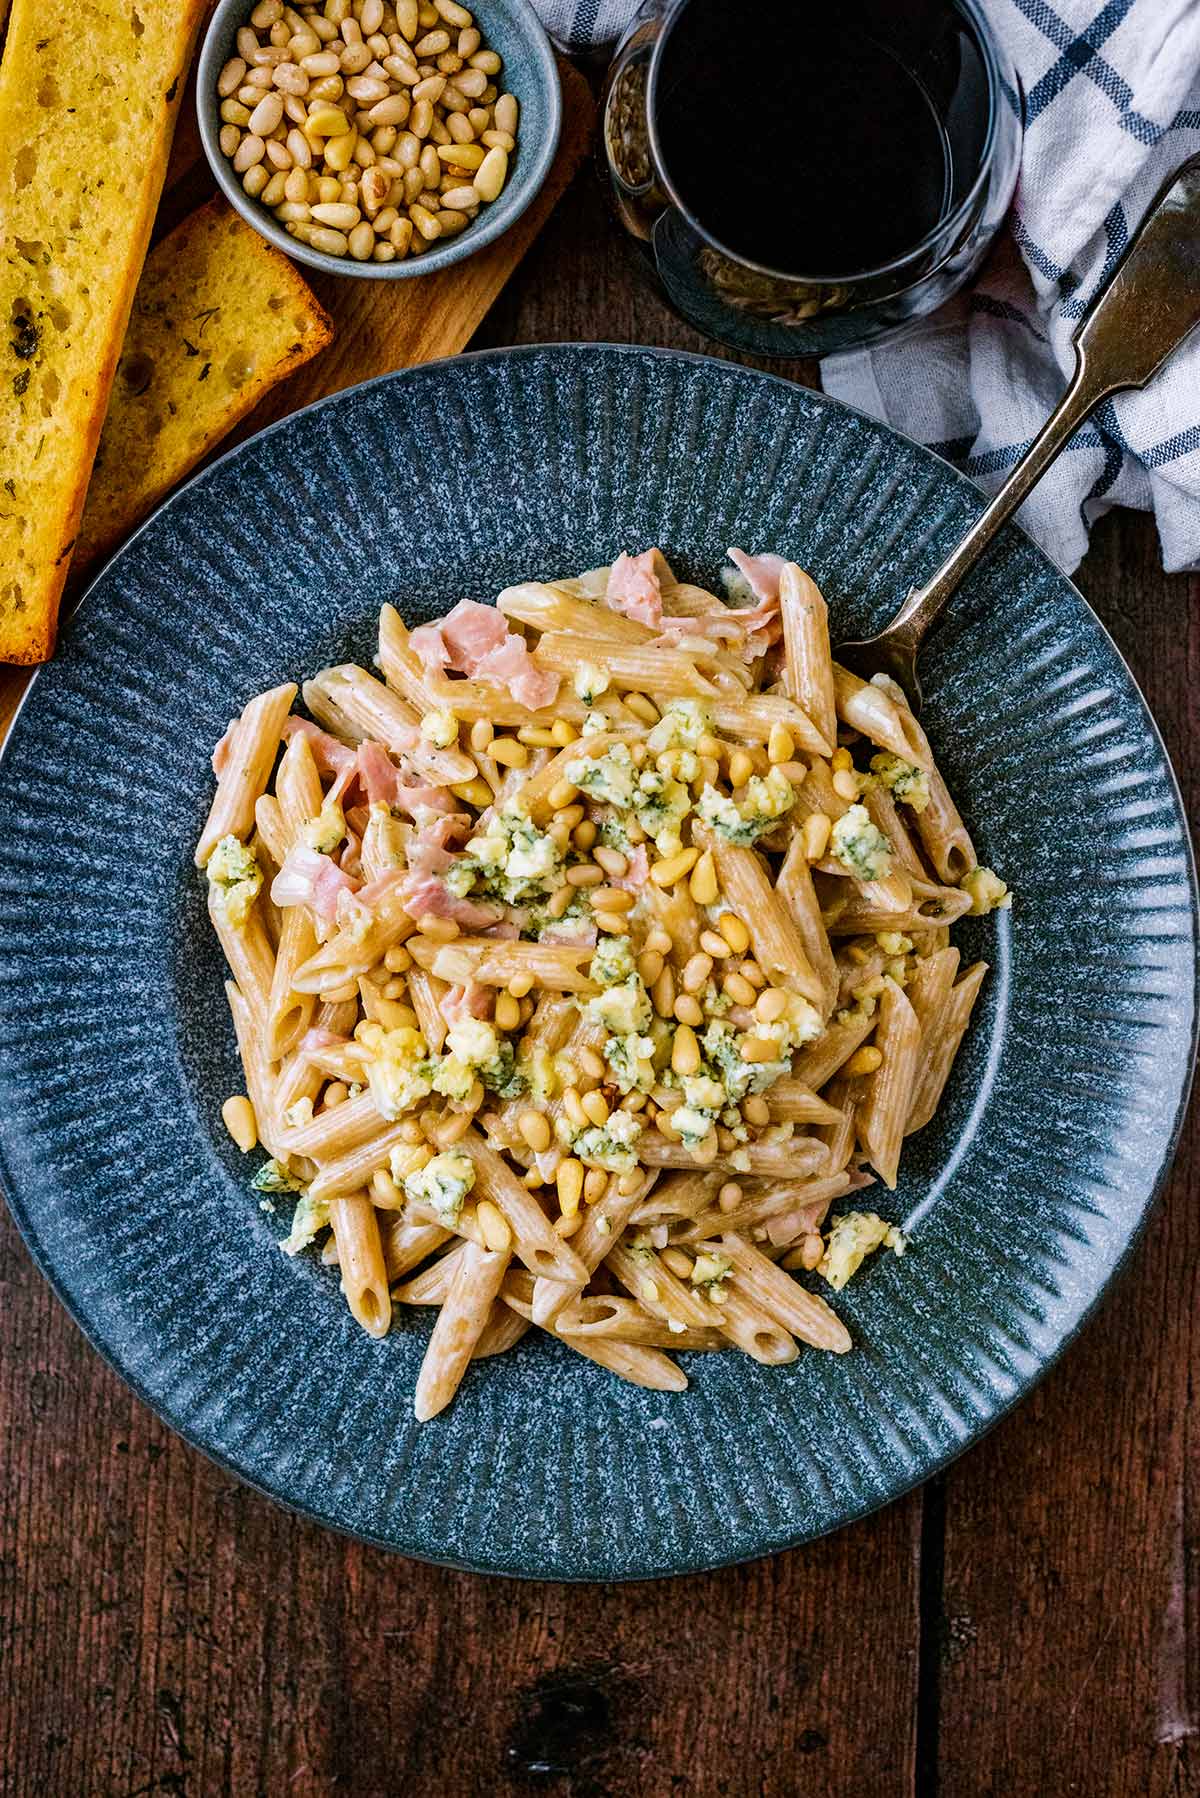 A plate of creamy pasta topped next to some garlic bread and a bowl of pine nuts.